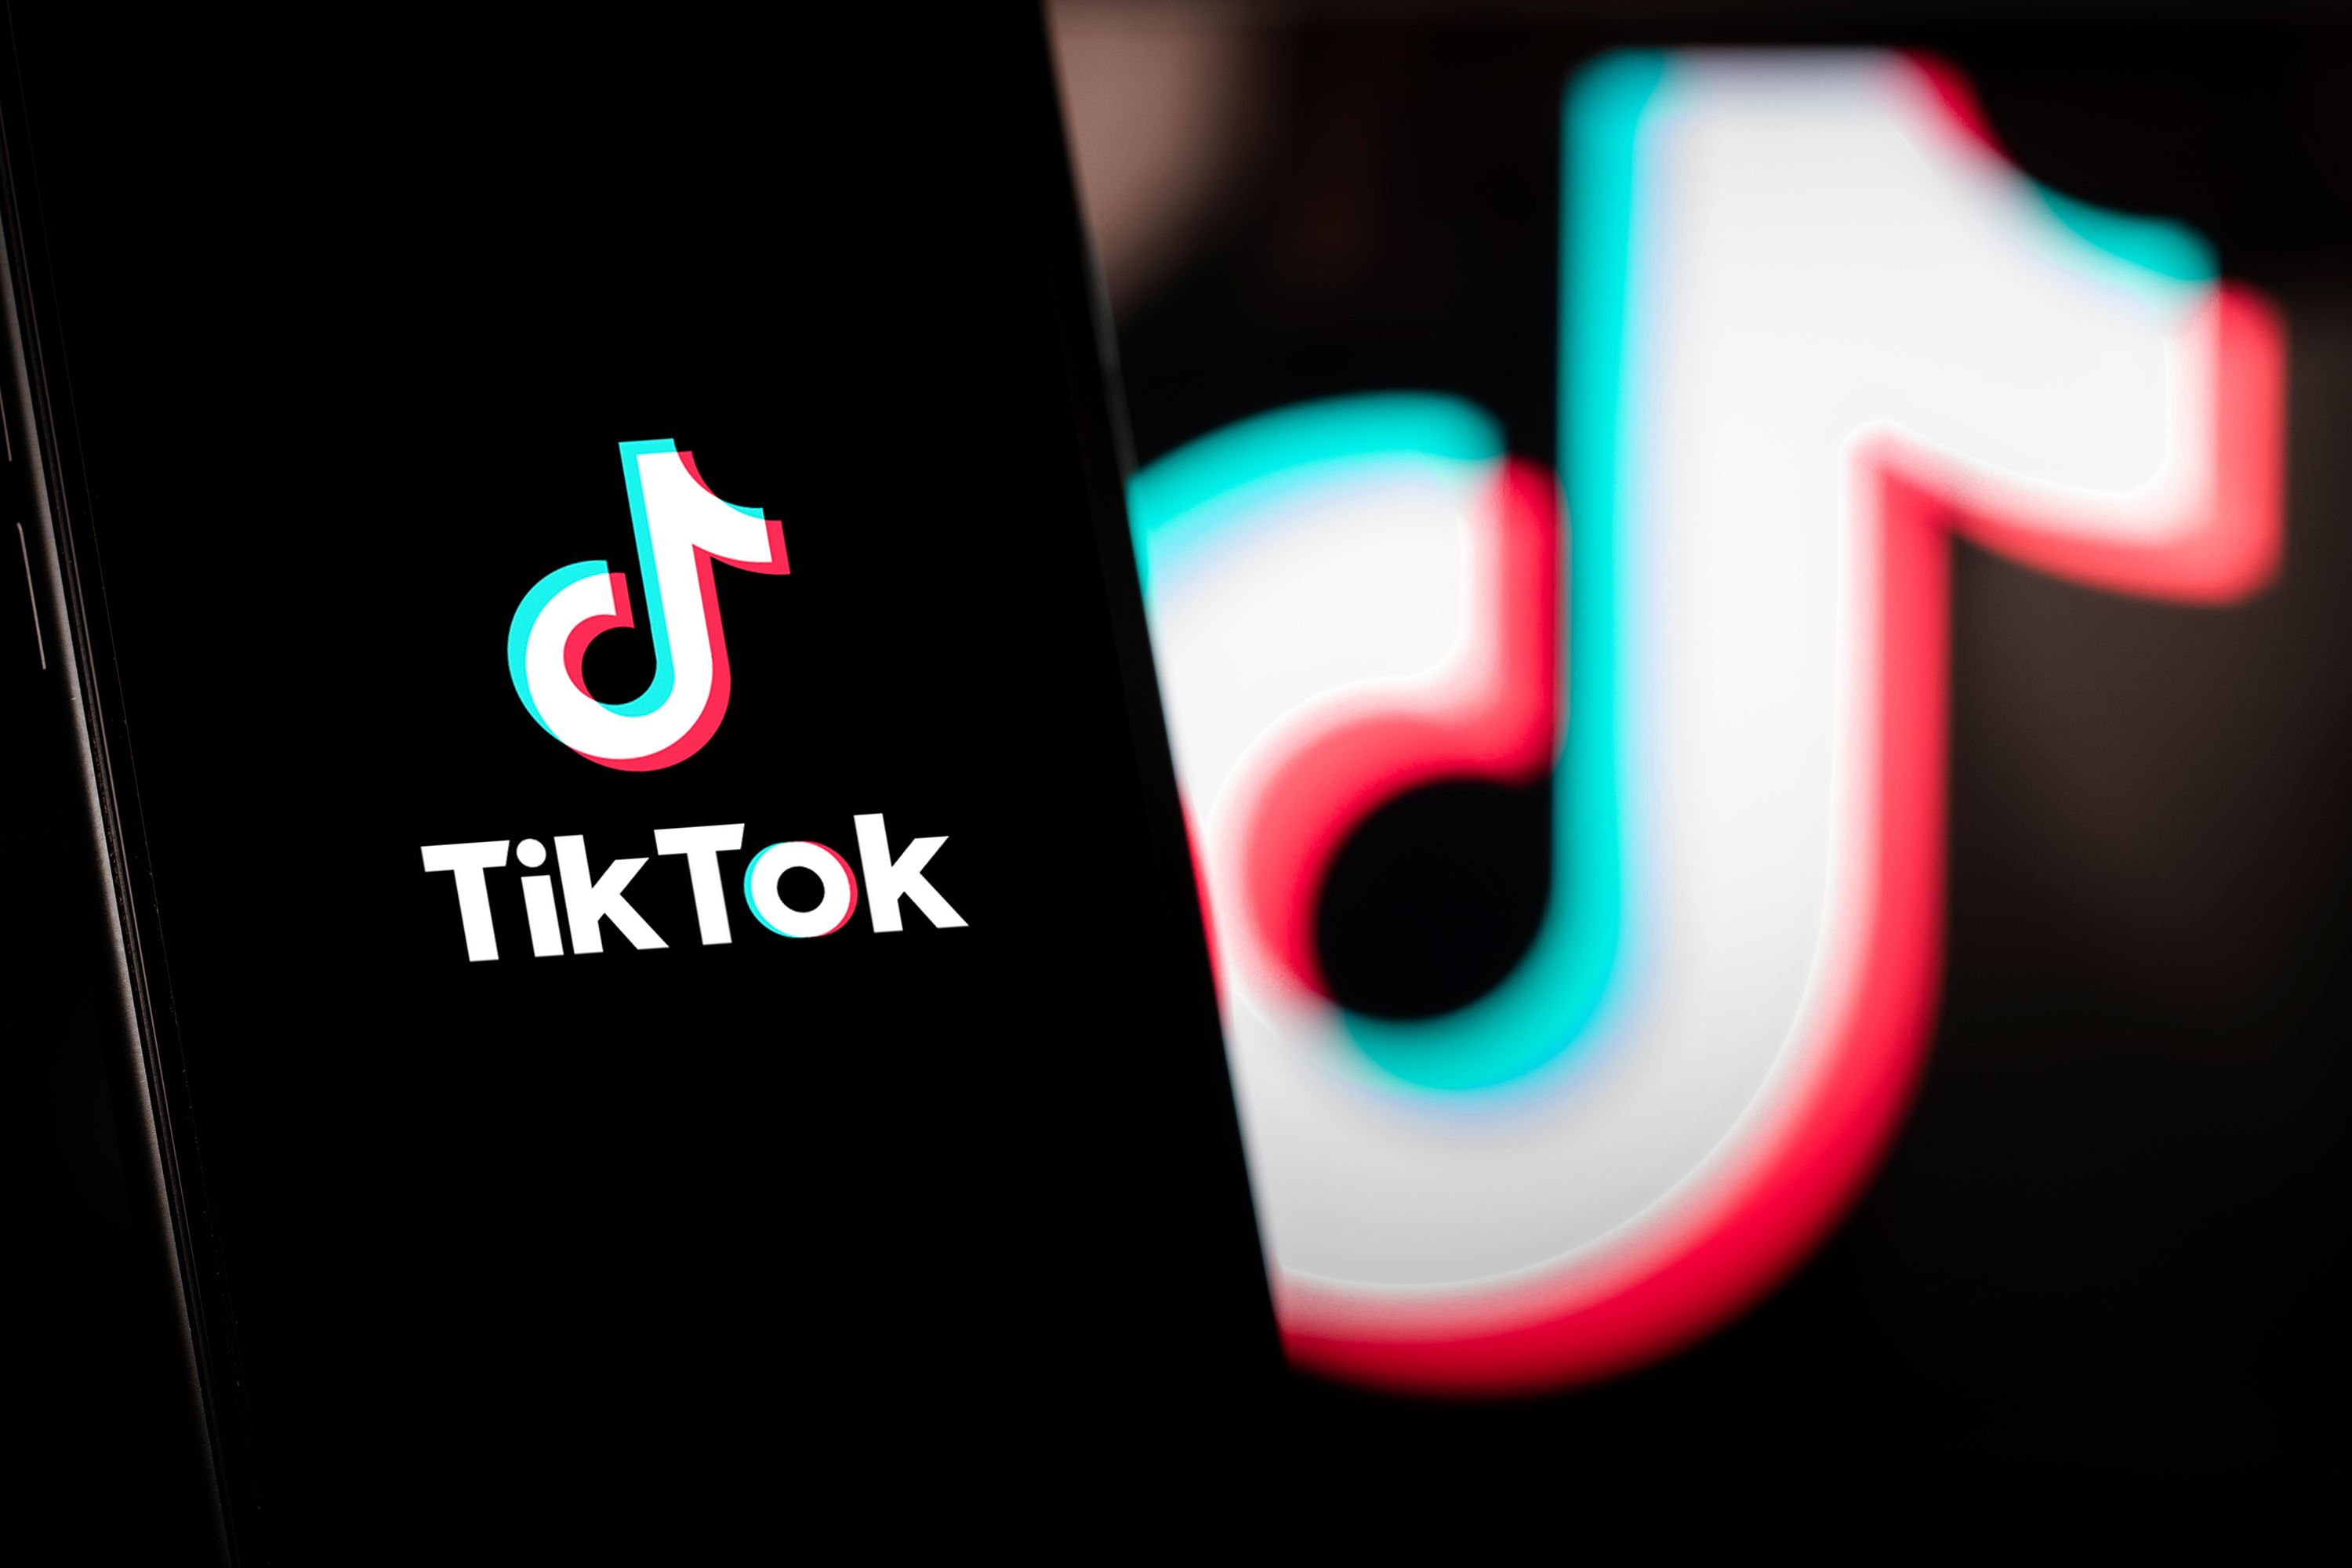 Lawmakers say TikTok is a national security threat, but evidence remains  unclear